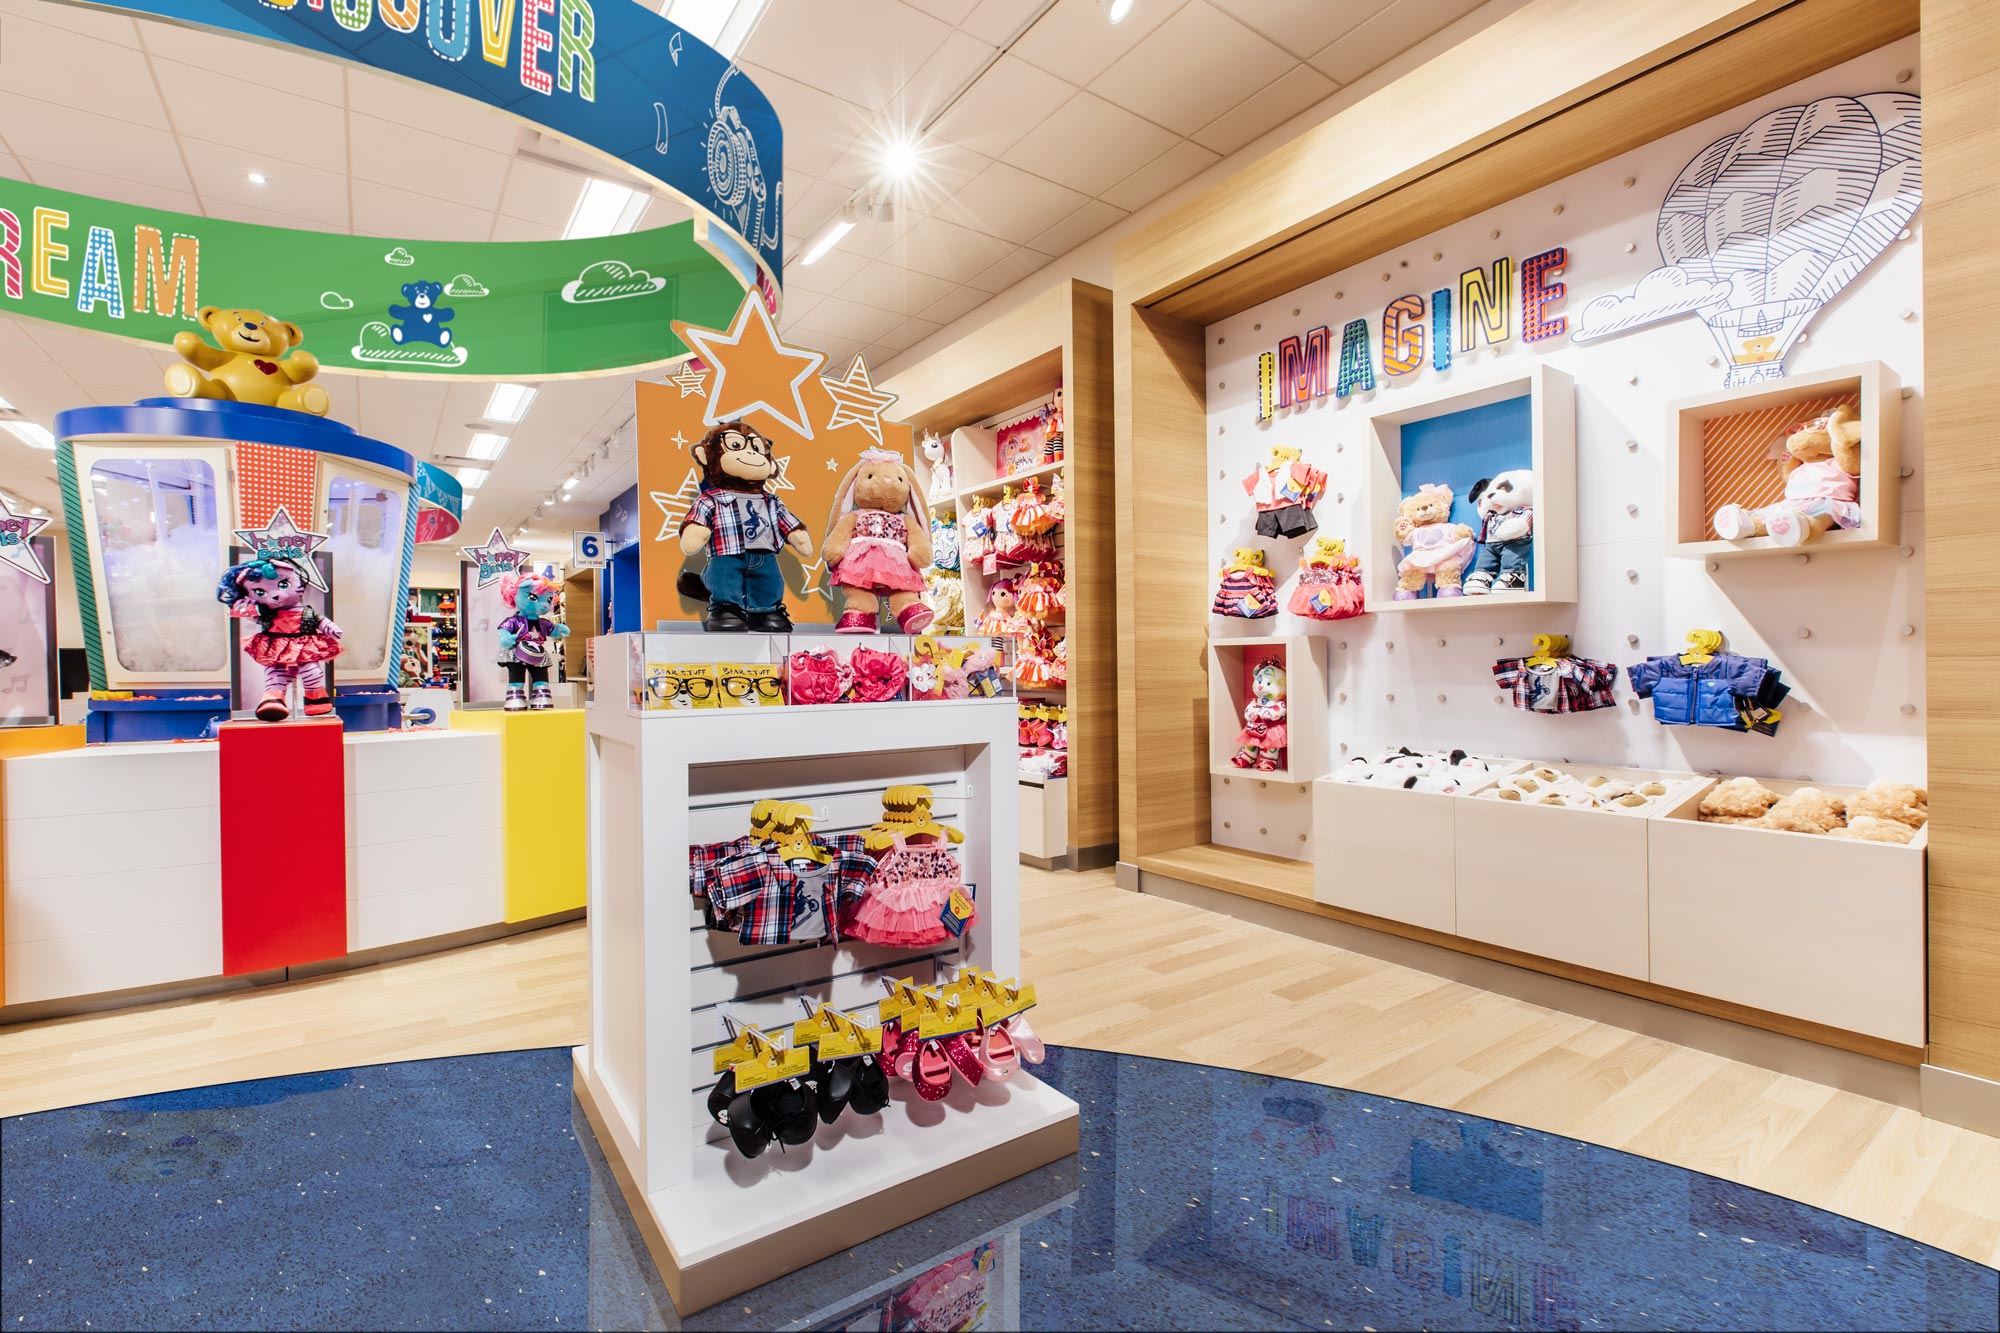 Working At Build-A-Bear Workshop: Company Overview and Culture